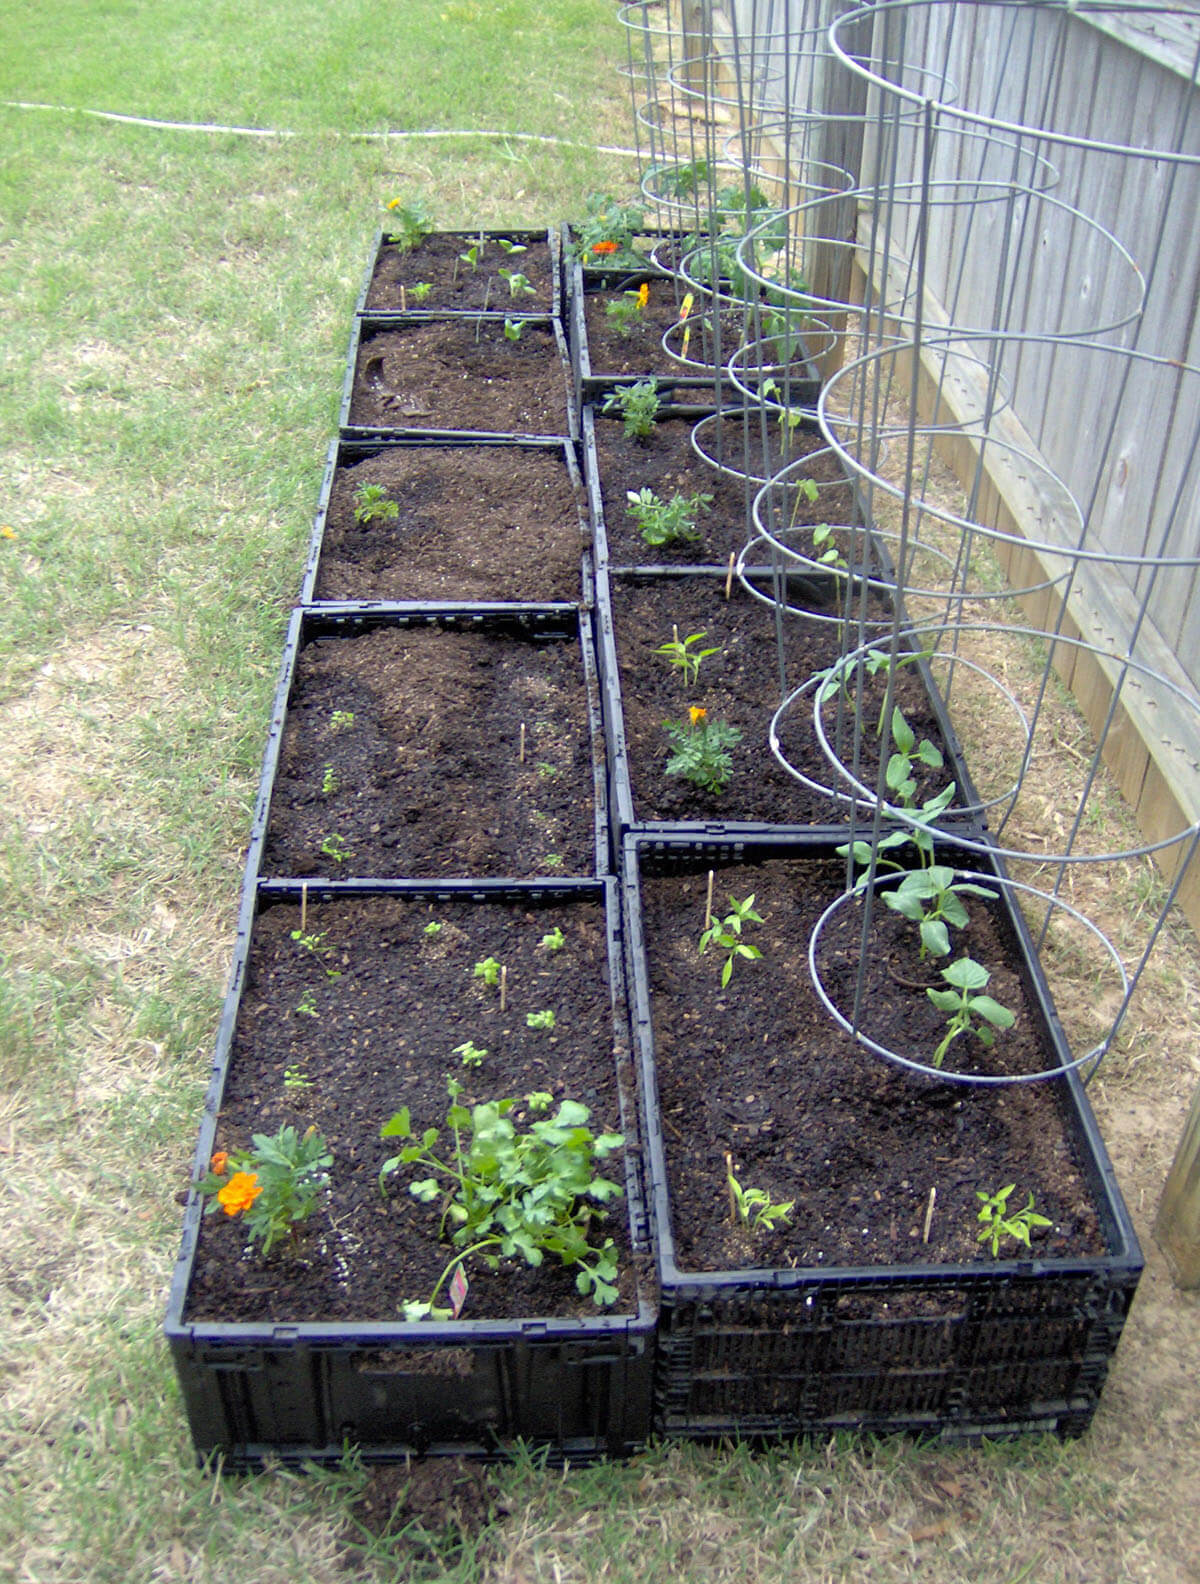 Space Saving Square Foot Garden with Crates